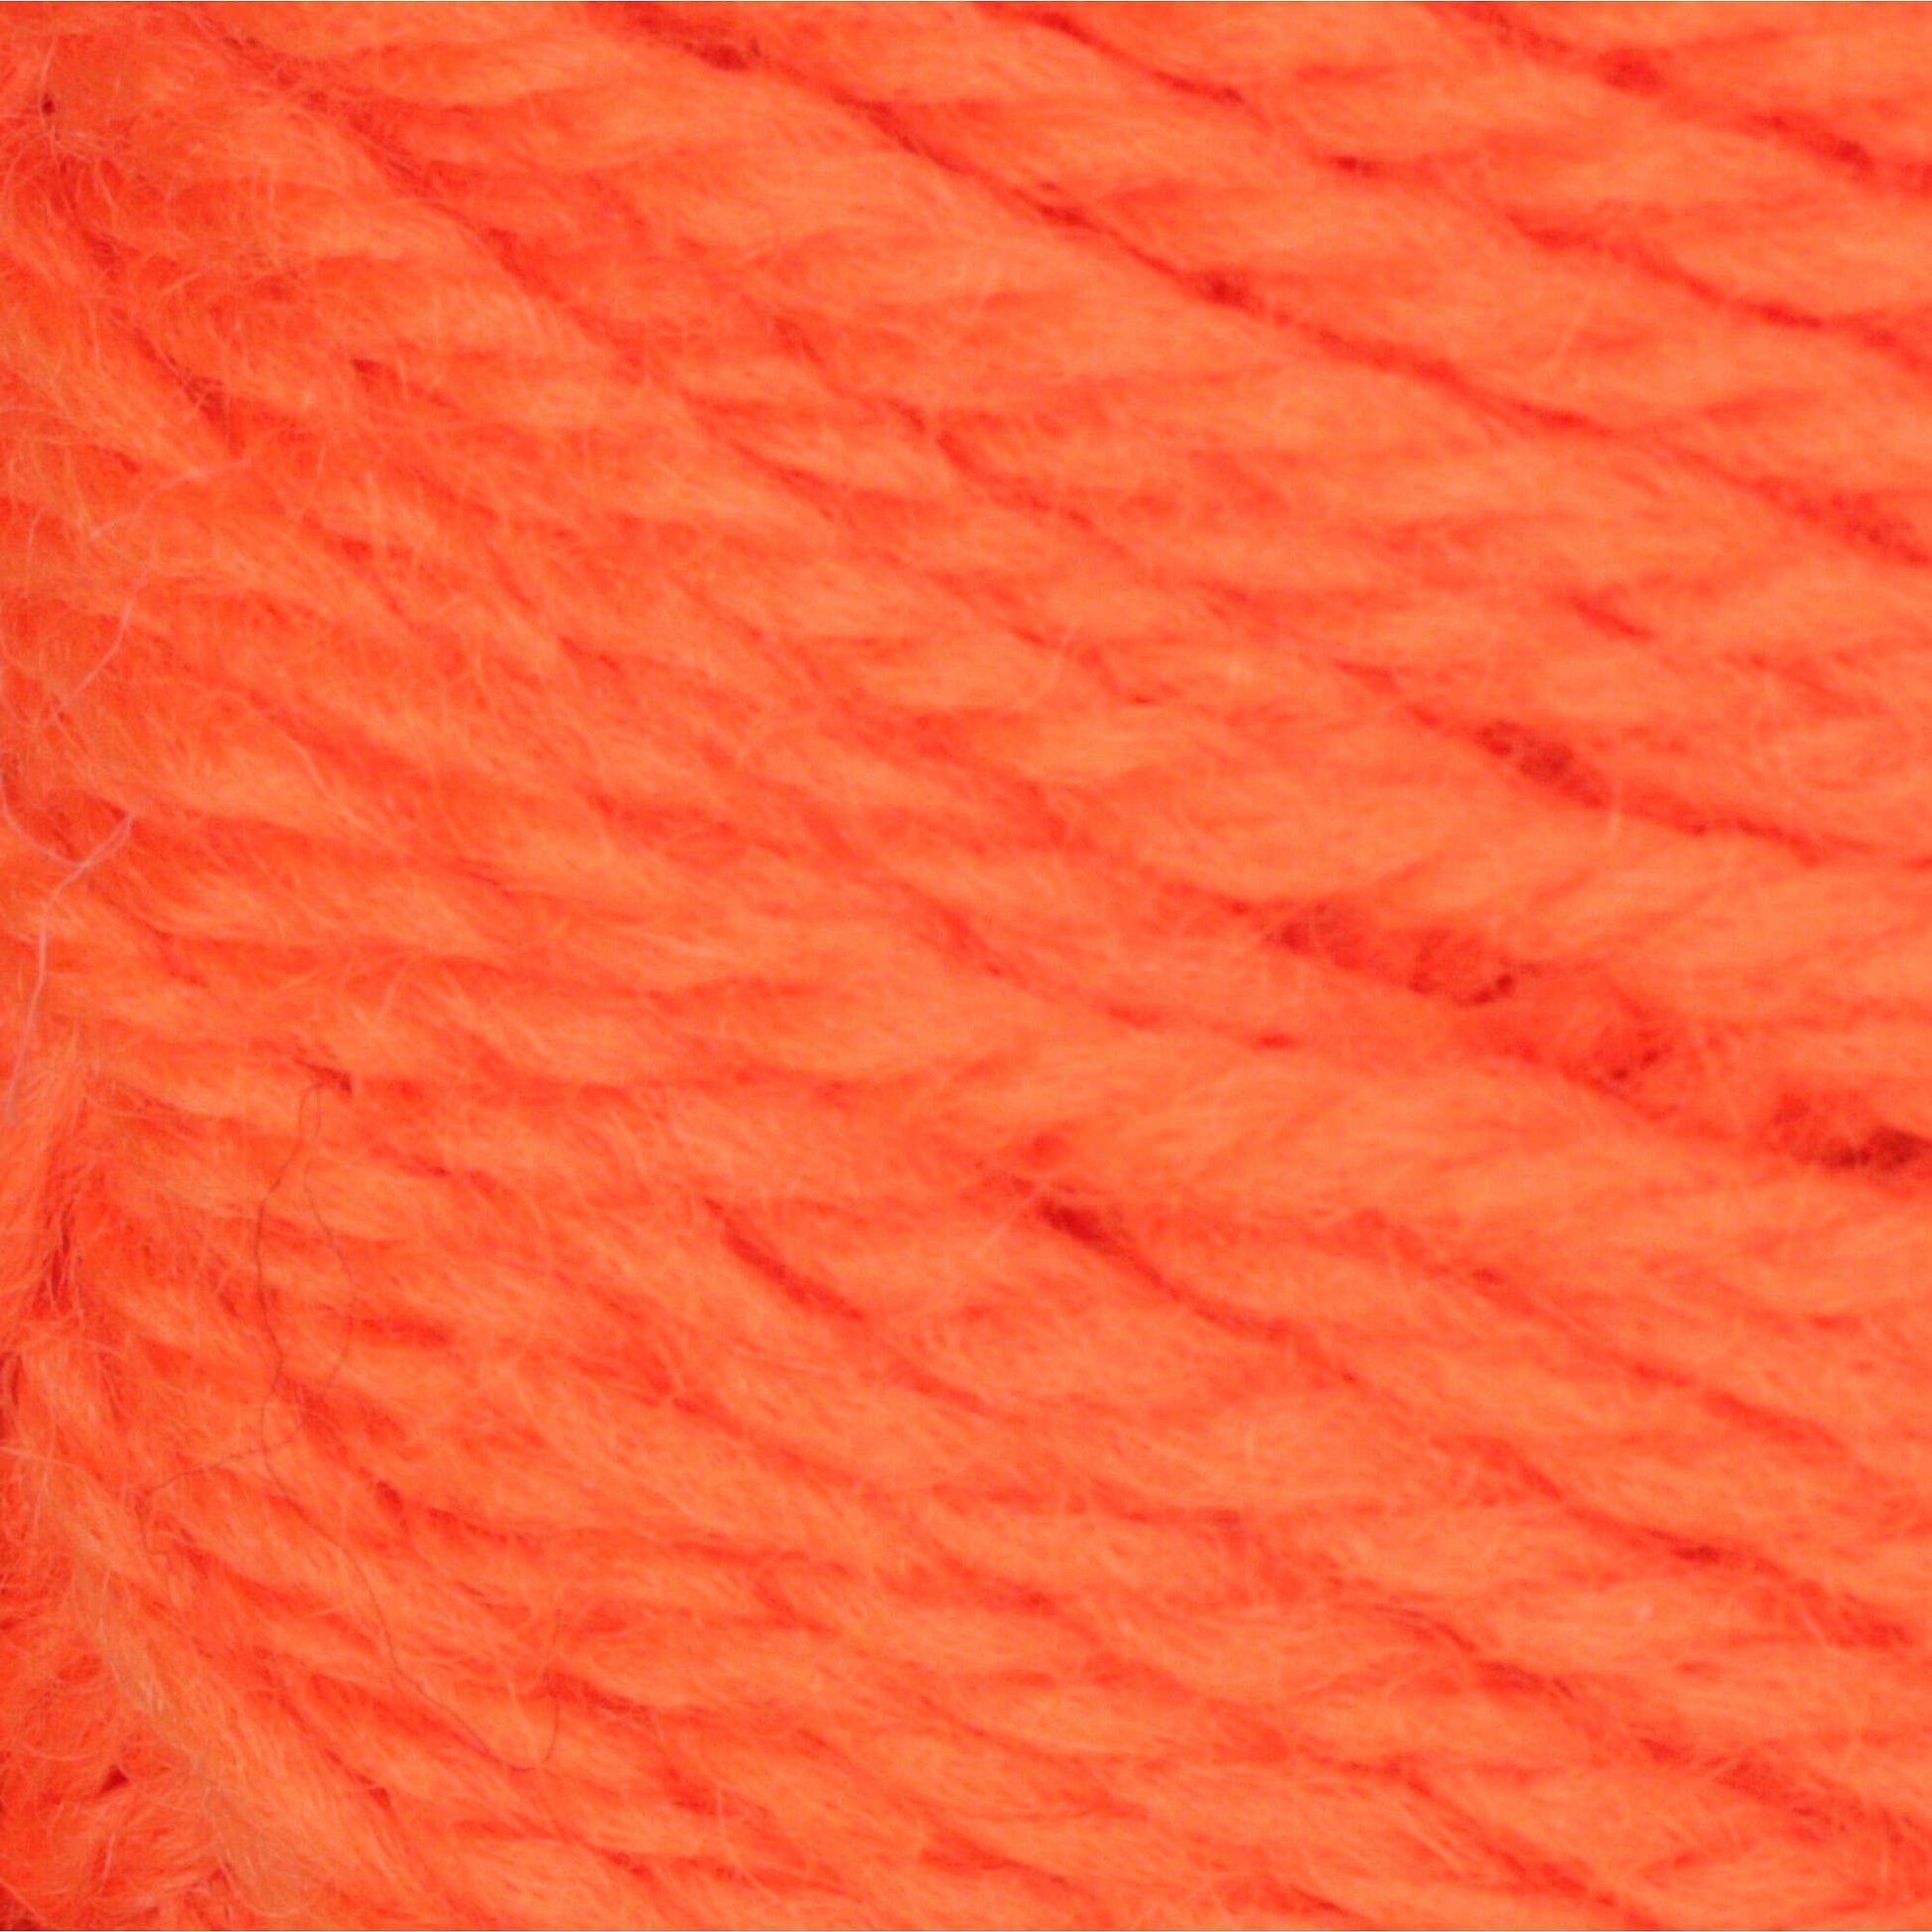 Patons Classic Wool Worsted Yarn - Discontinued Shades Vibrant Orange